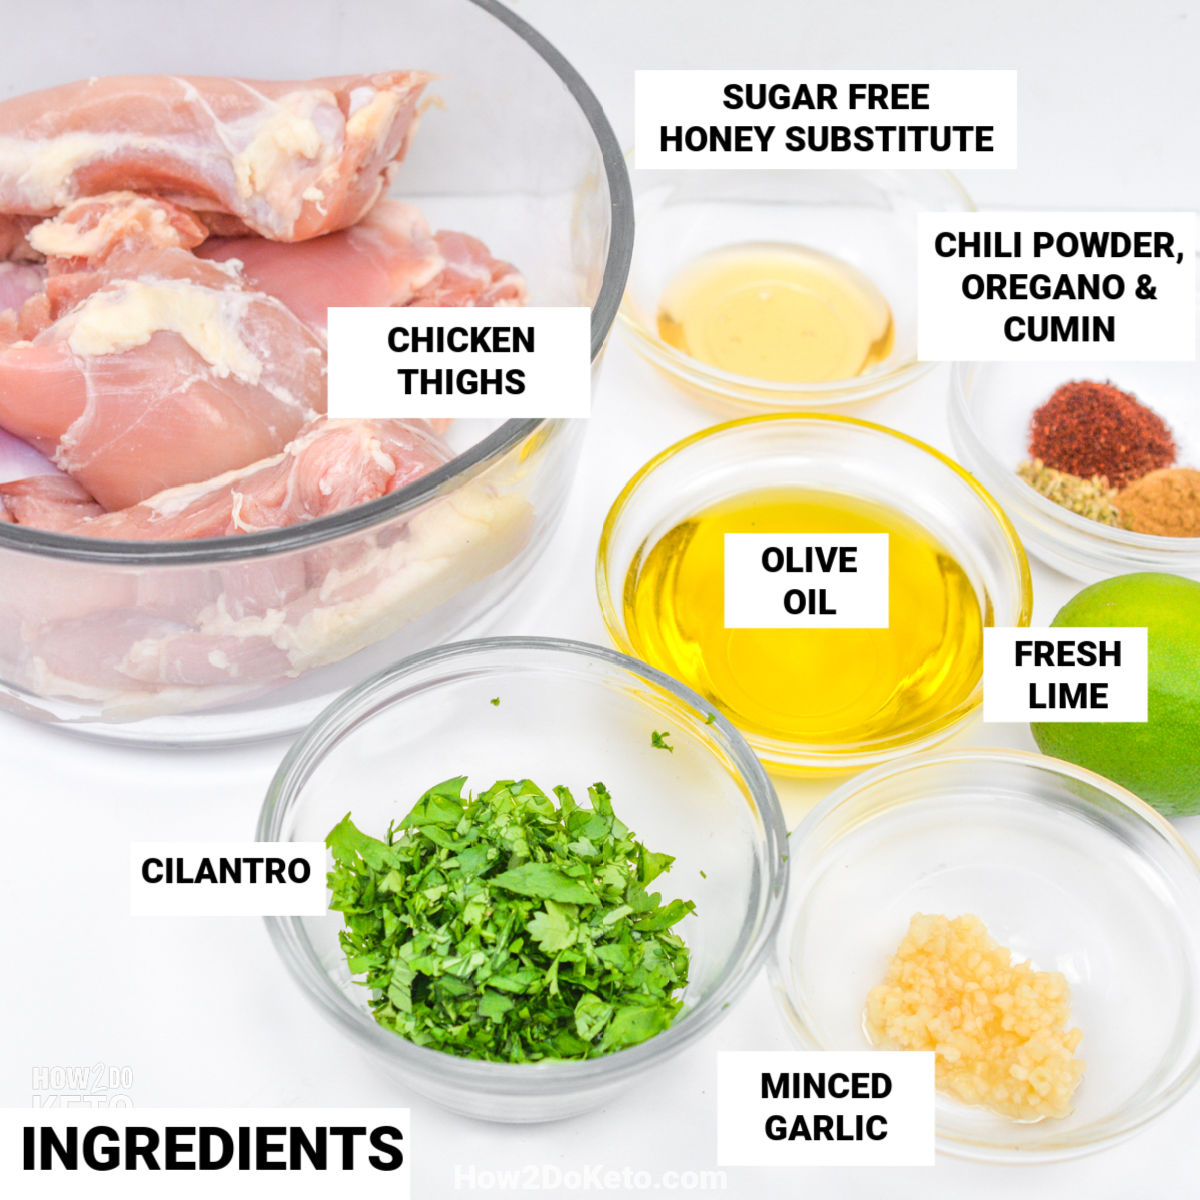 Keto Cilantro Lime Chicken Thighs Ingredients, with text labels